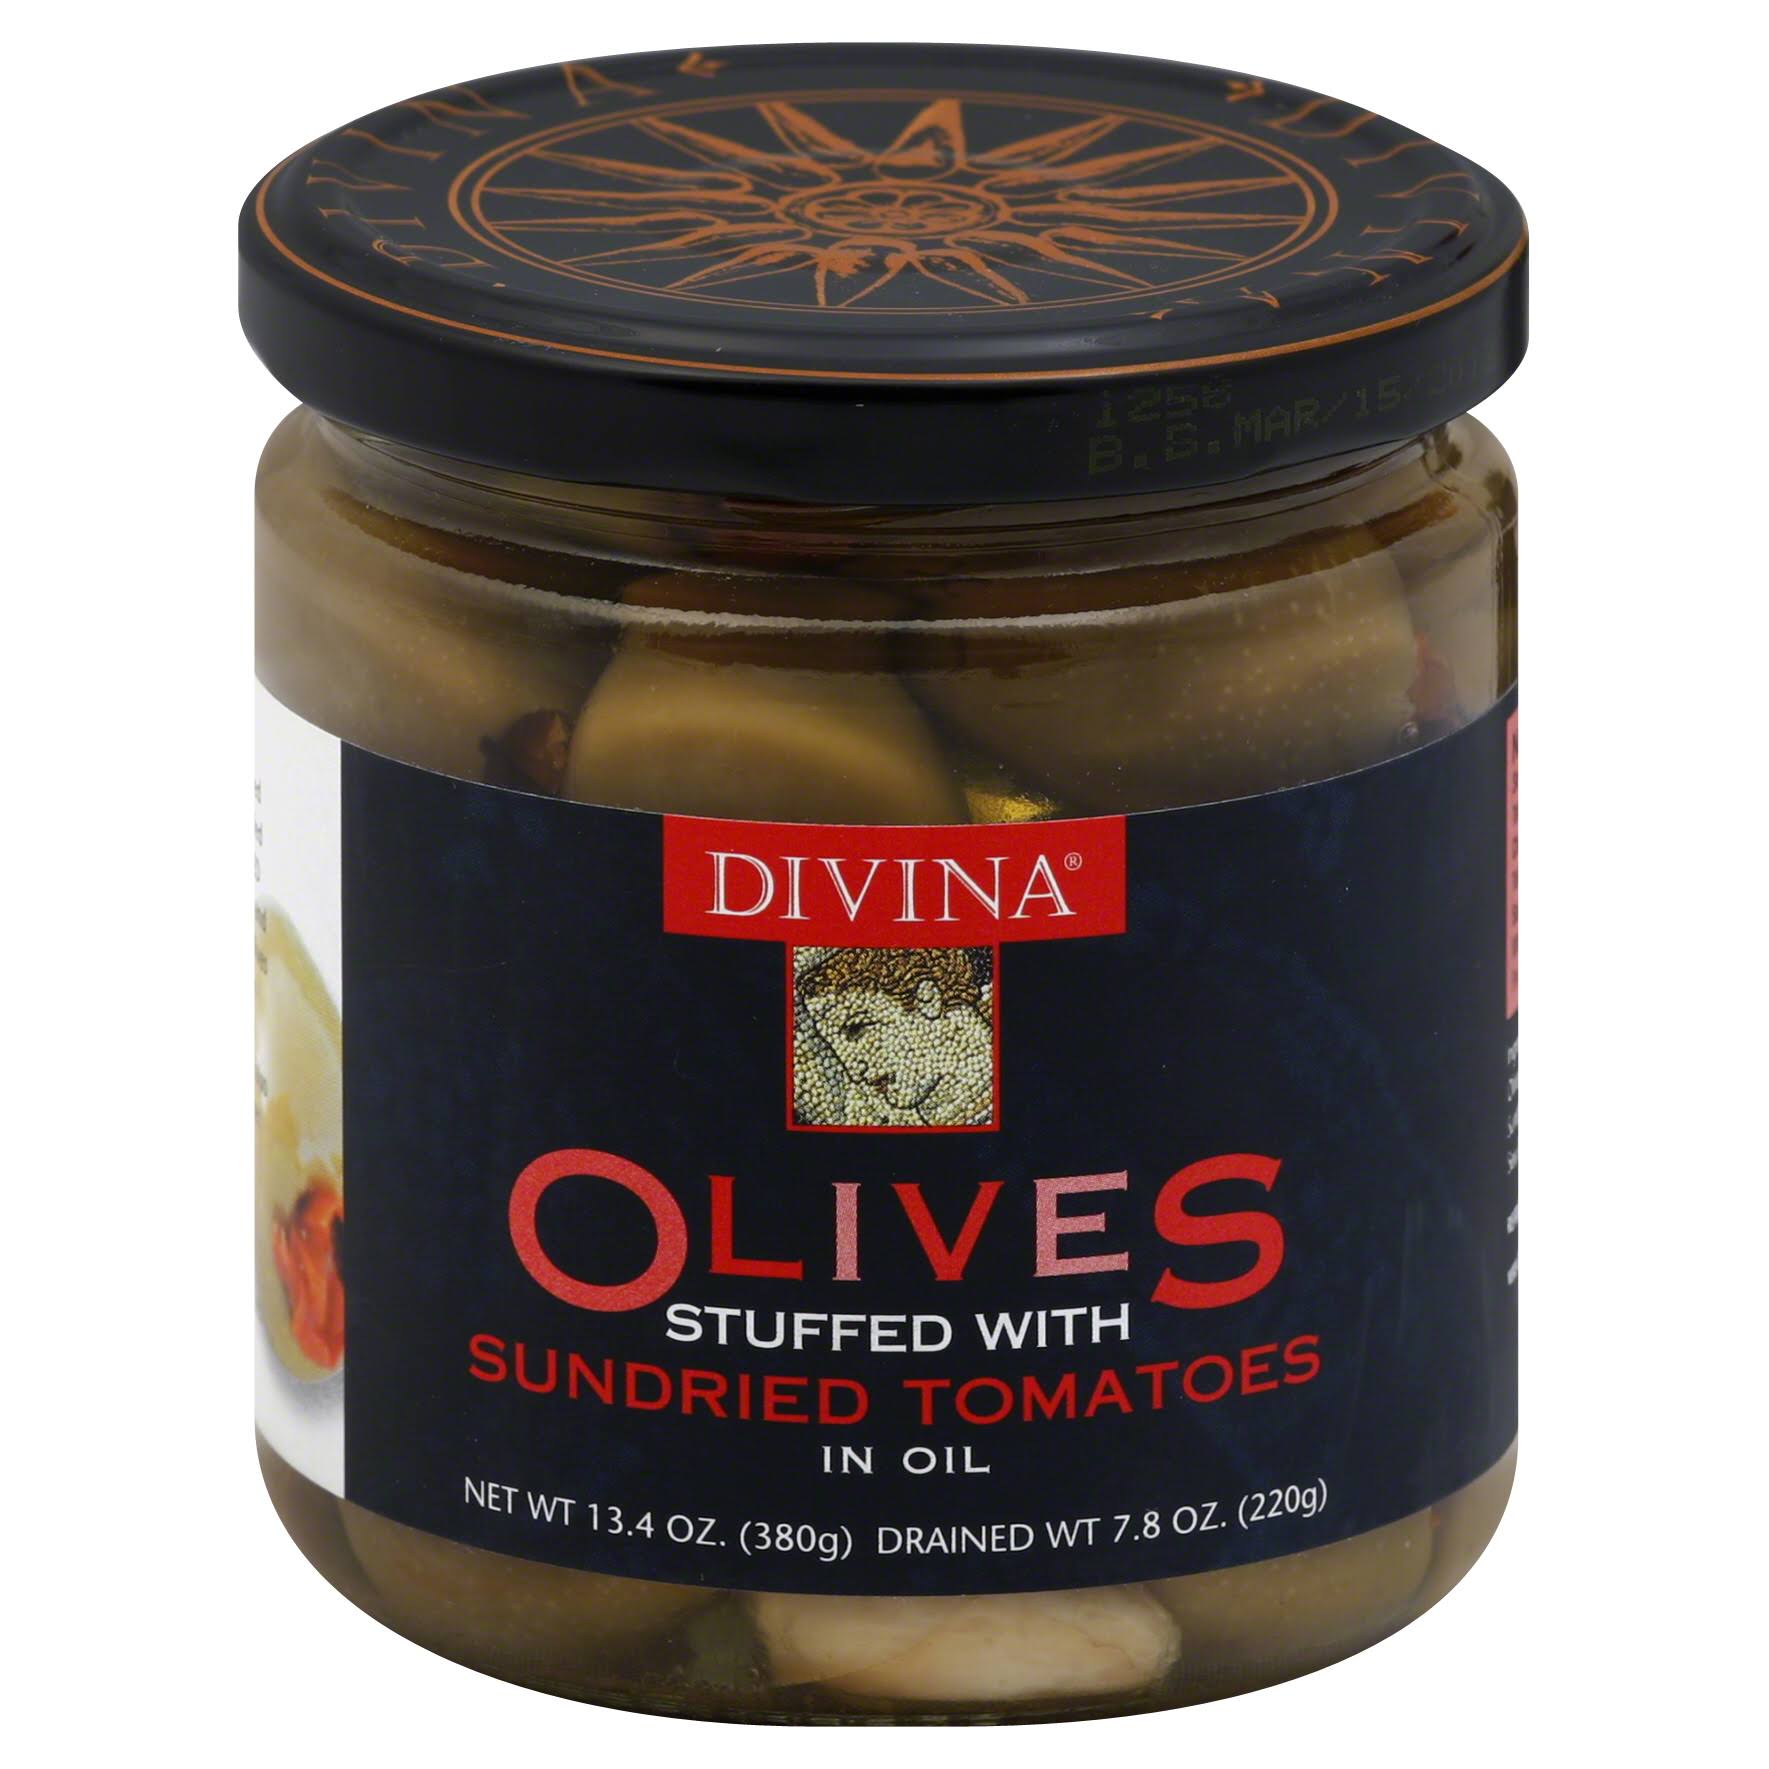 Divina Stuffed Olives - With Sundried Tomatoes, In Oil, 13.4oz